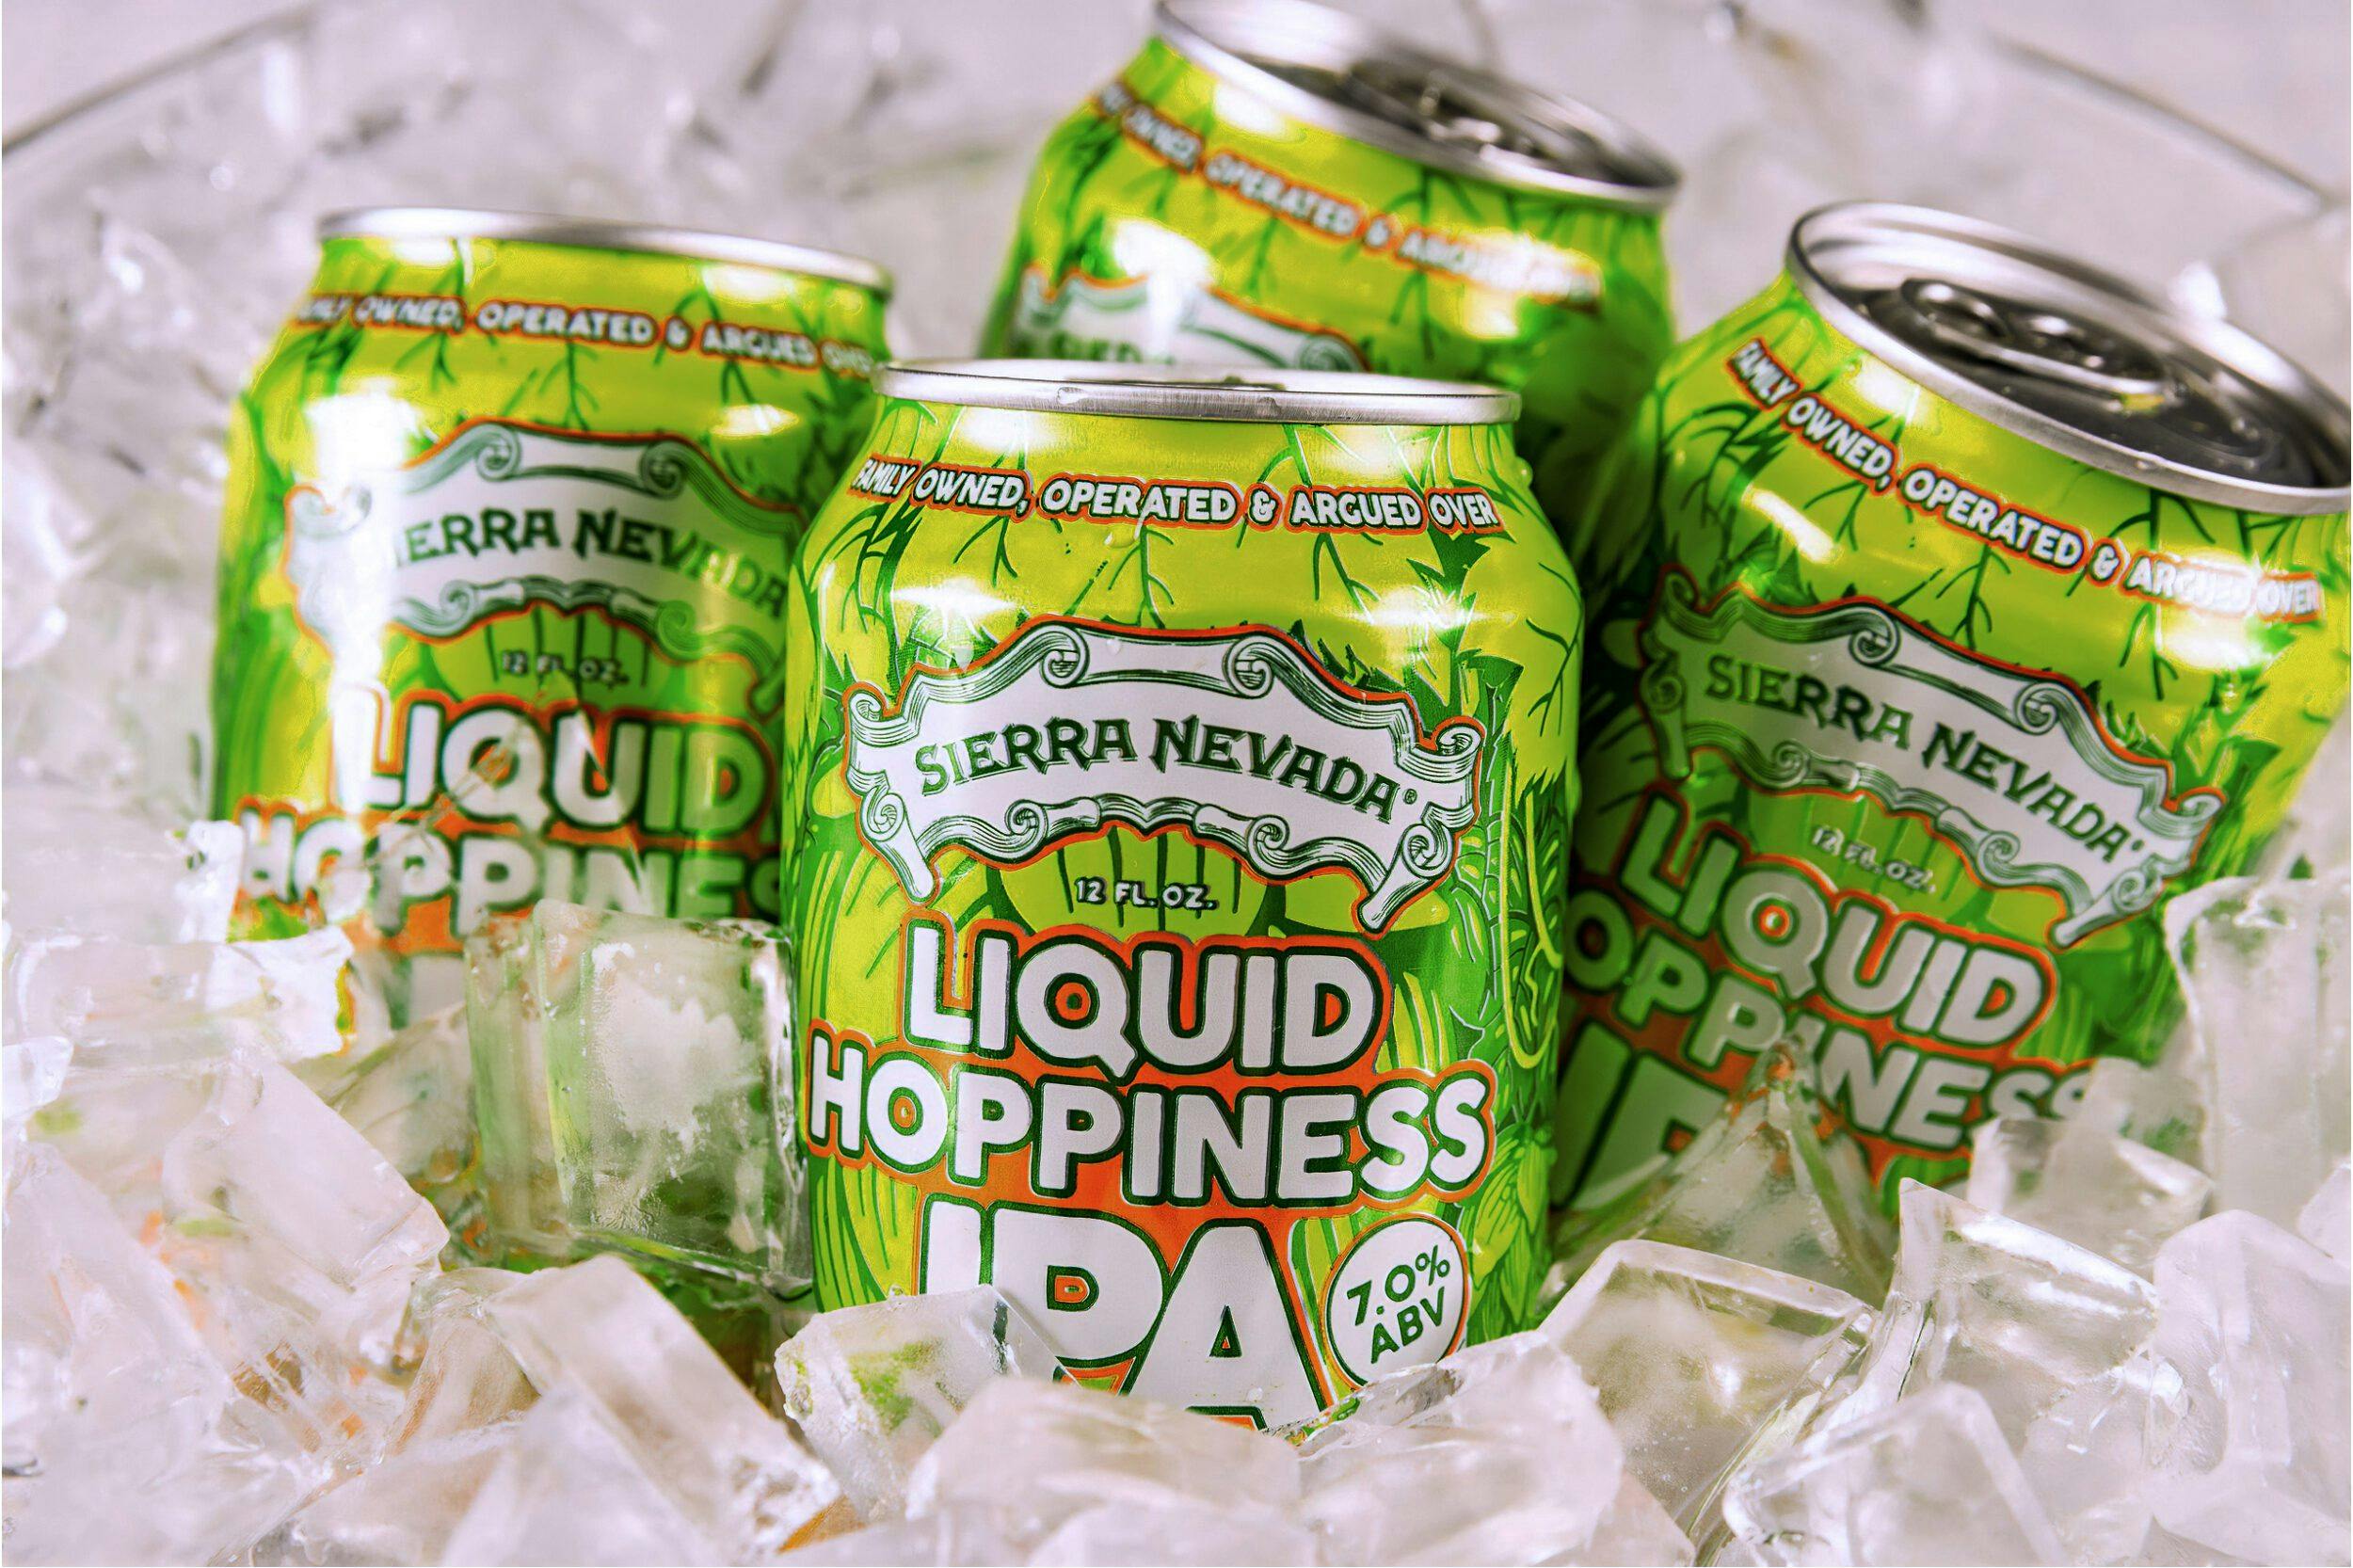 Liquid Hoppiness IPA beer cans on ice